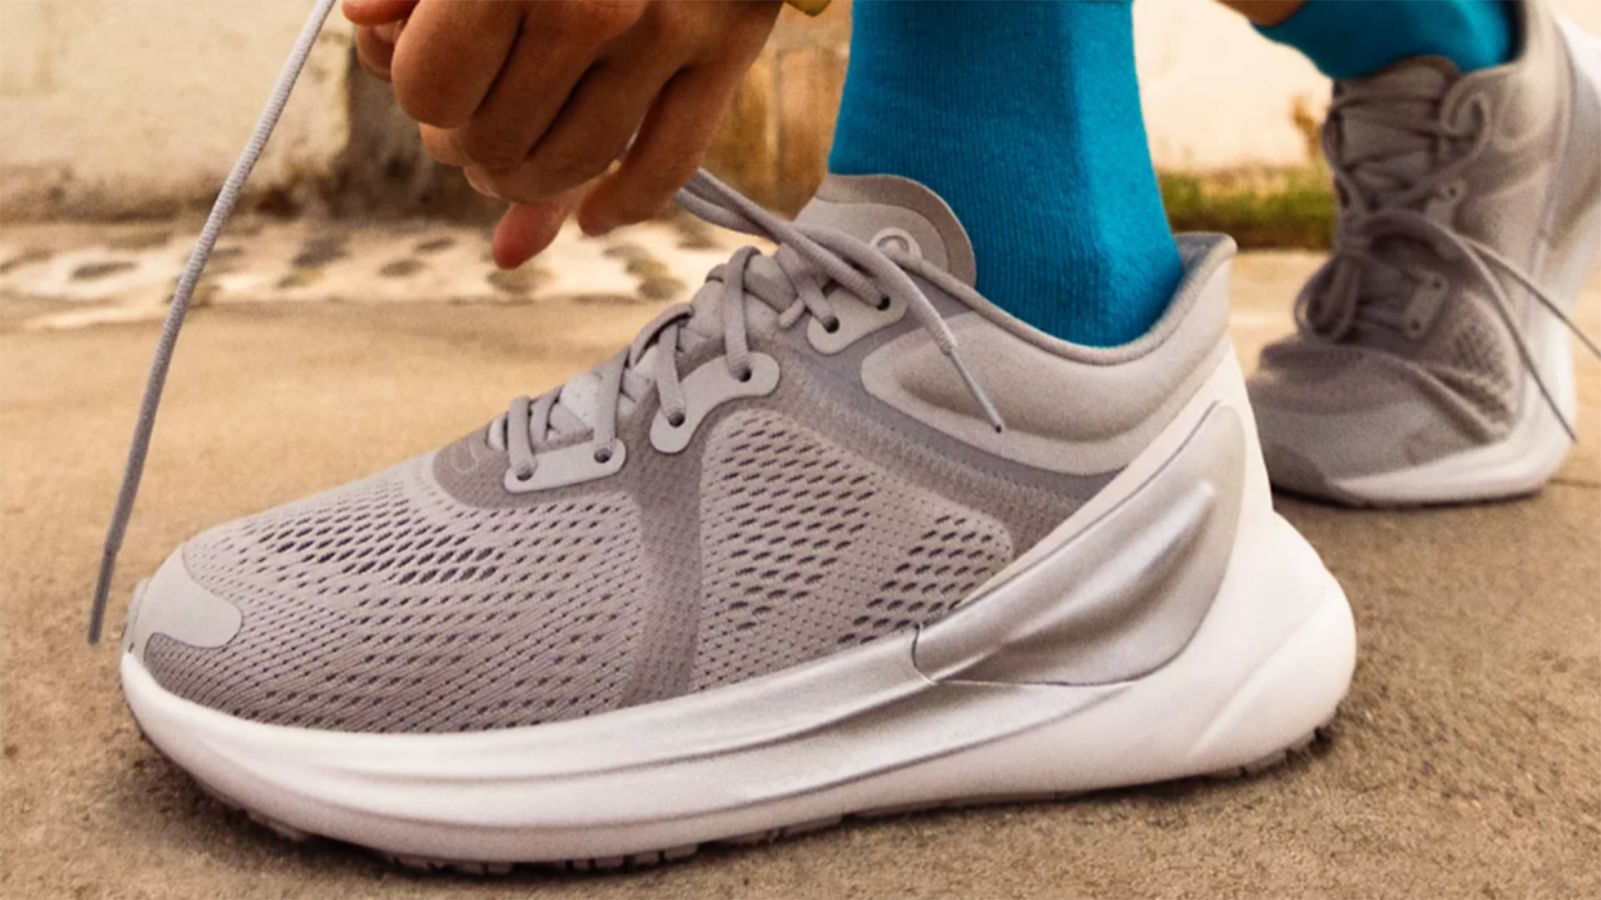 We put Lululemon’s first-ever running shoe to the test — here’s how it held up | CNN Underscored